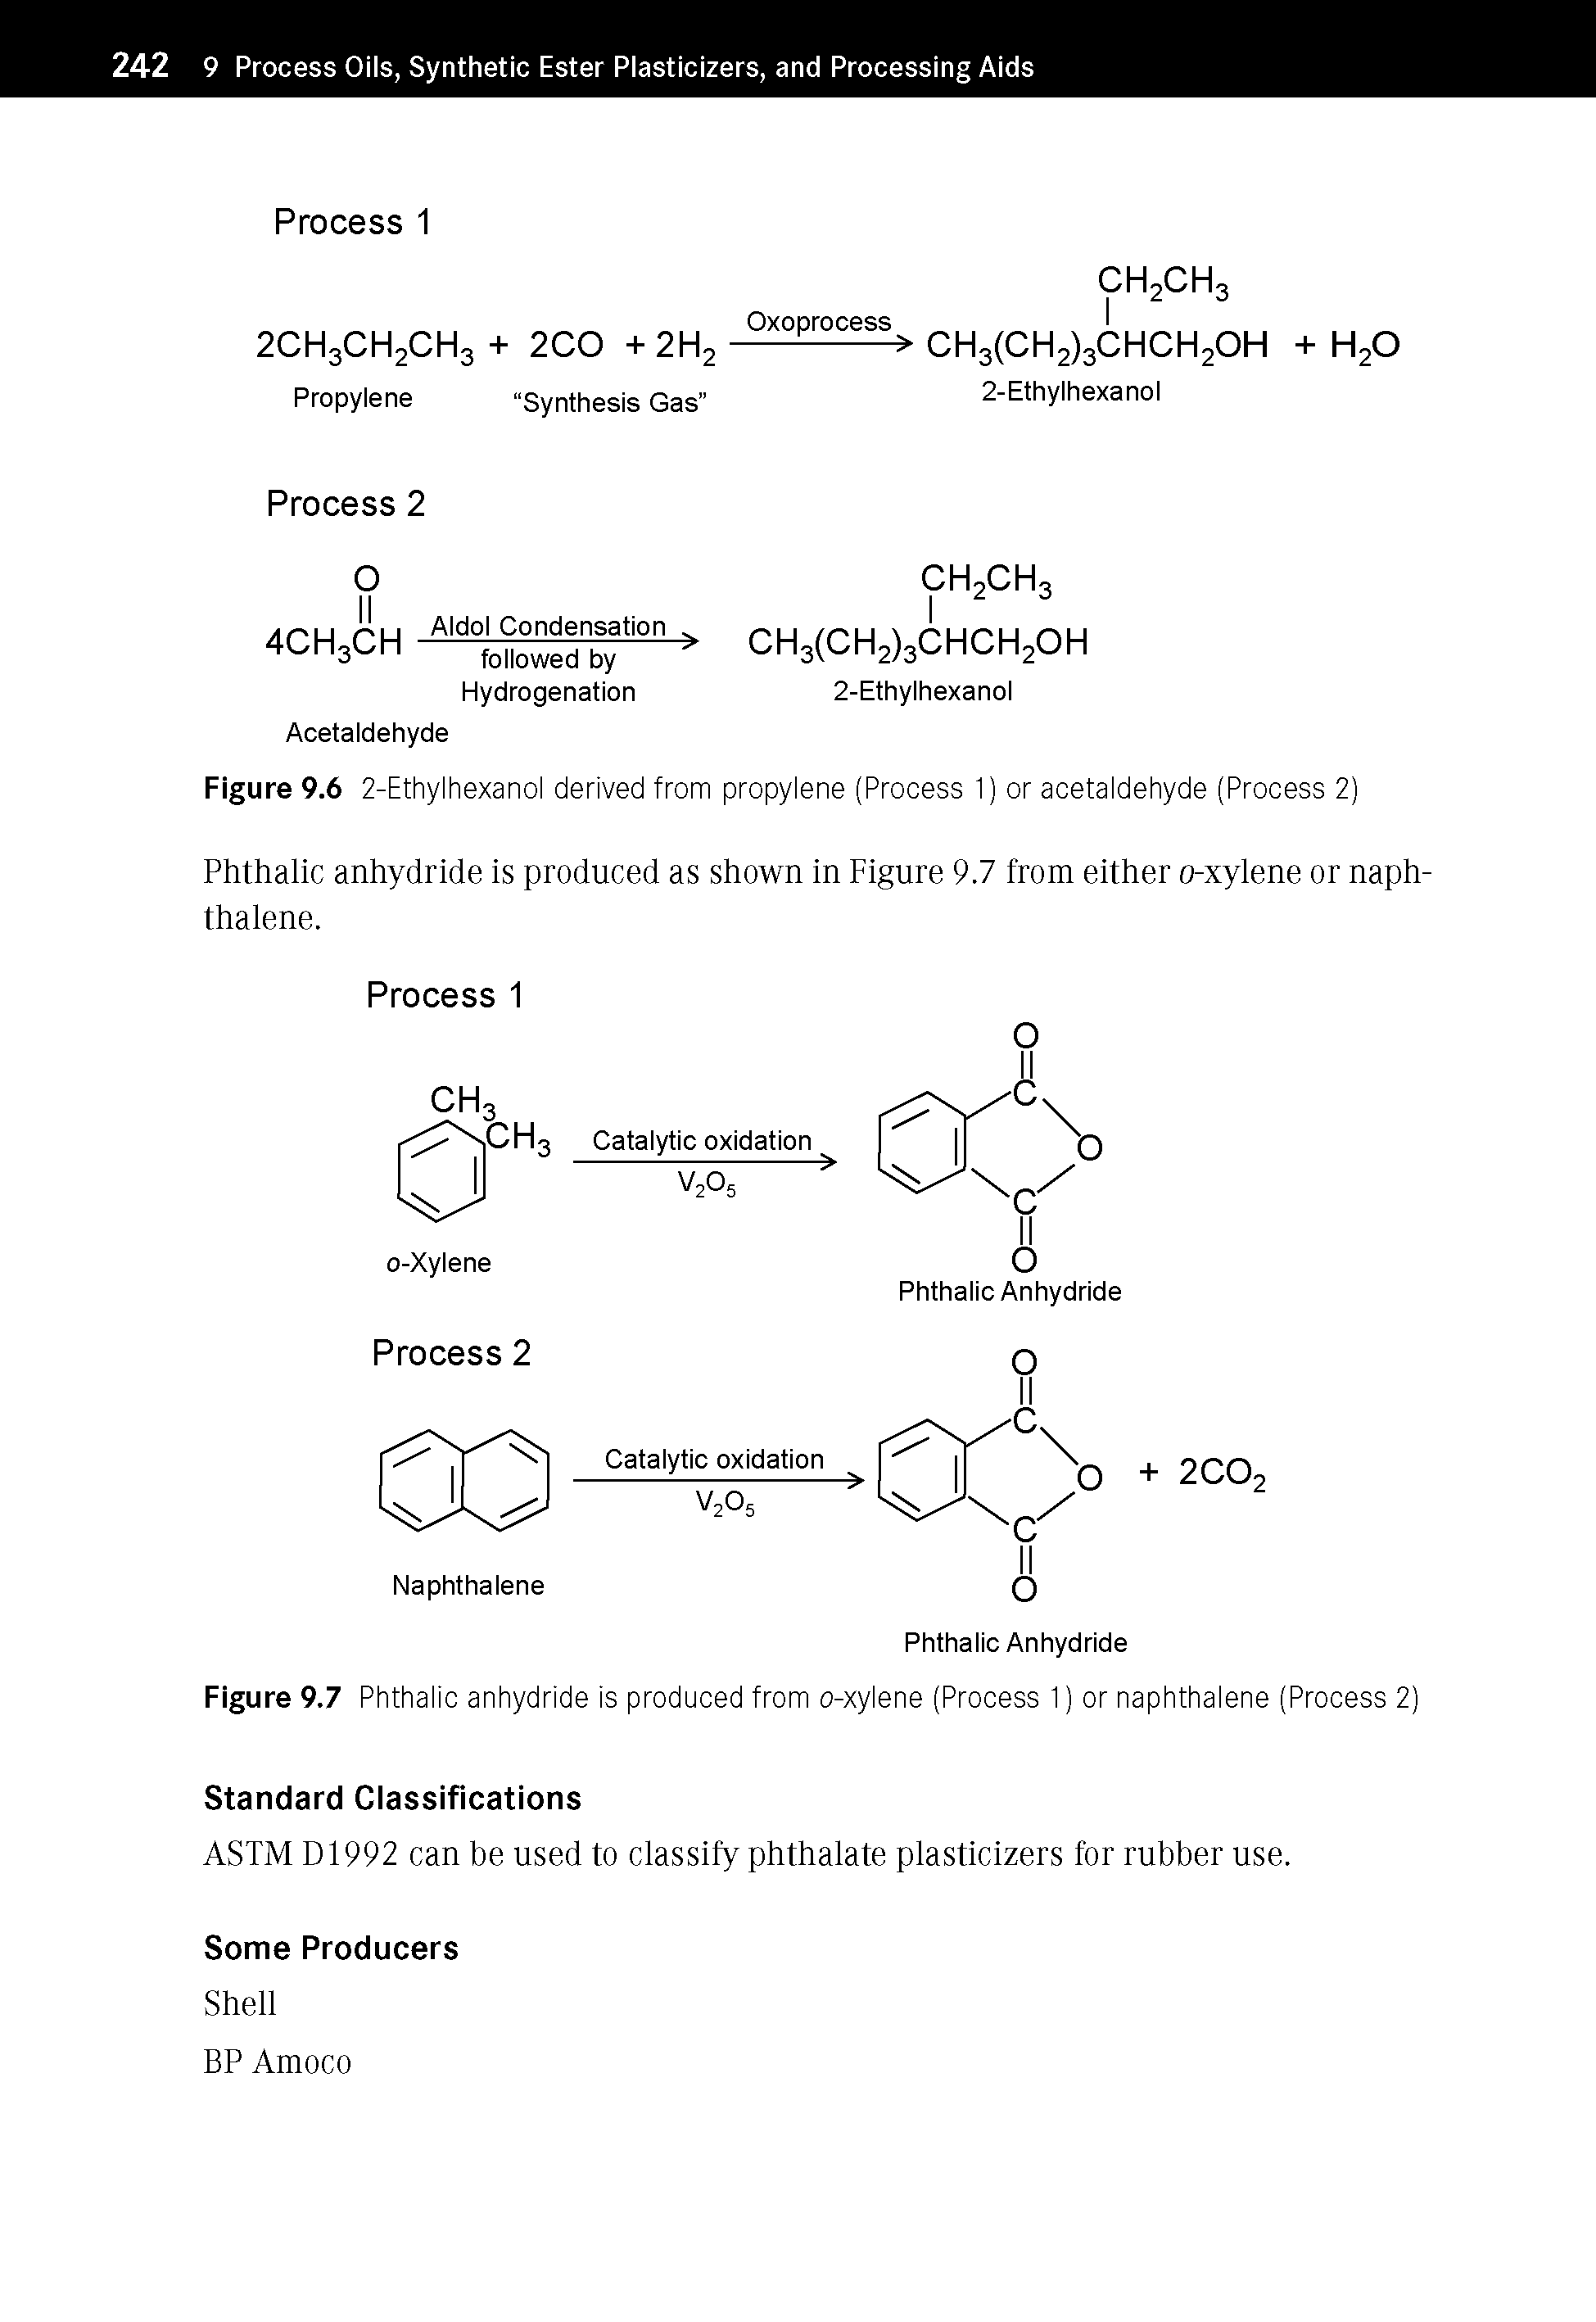 Figure 9.7 Phthalic anhydride is produced from o-xylene (Process 1) or naphthalene (Process 2)...